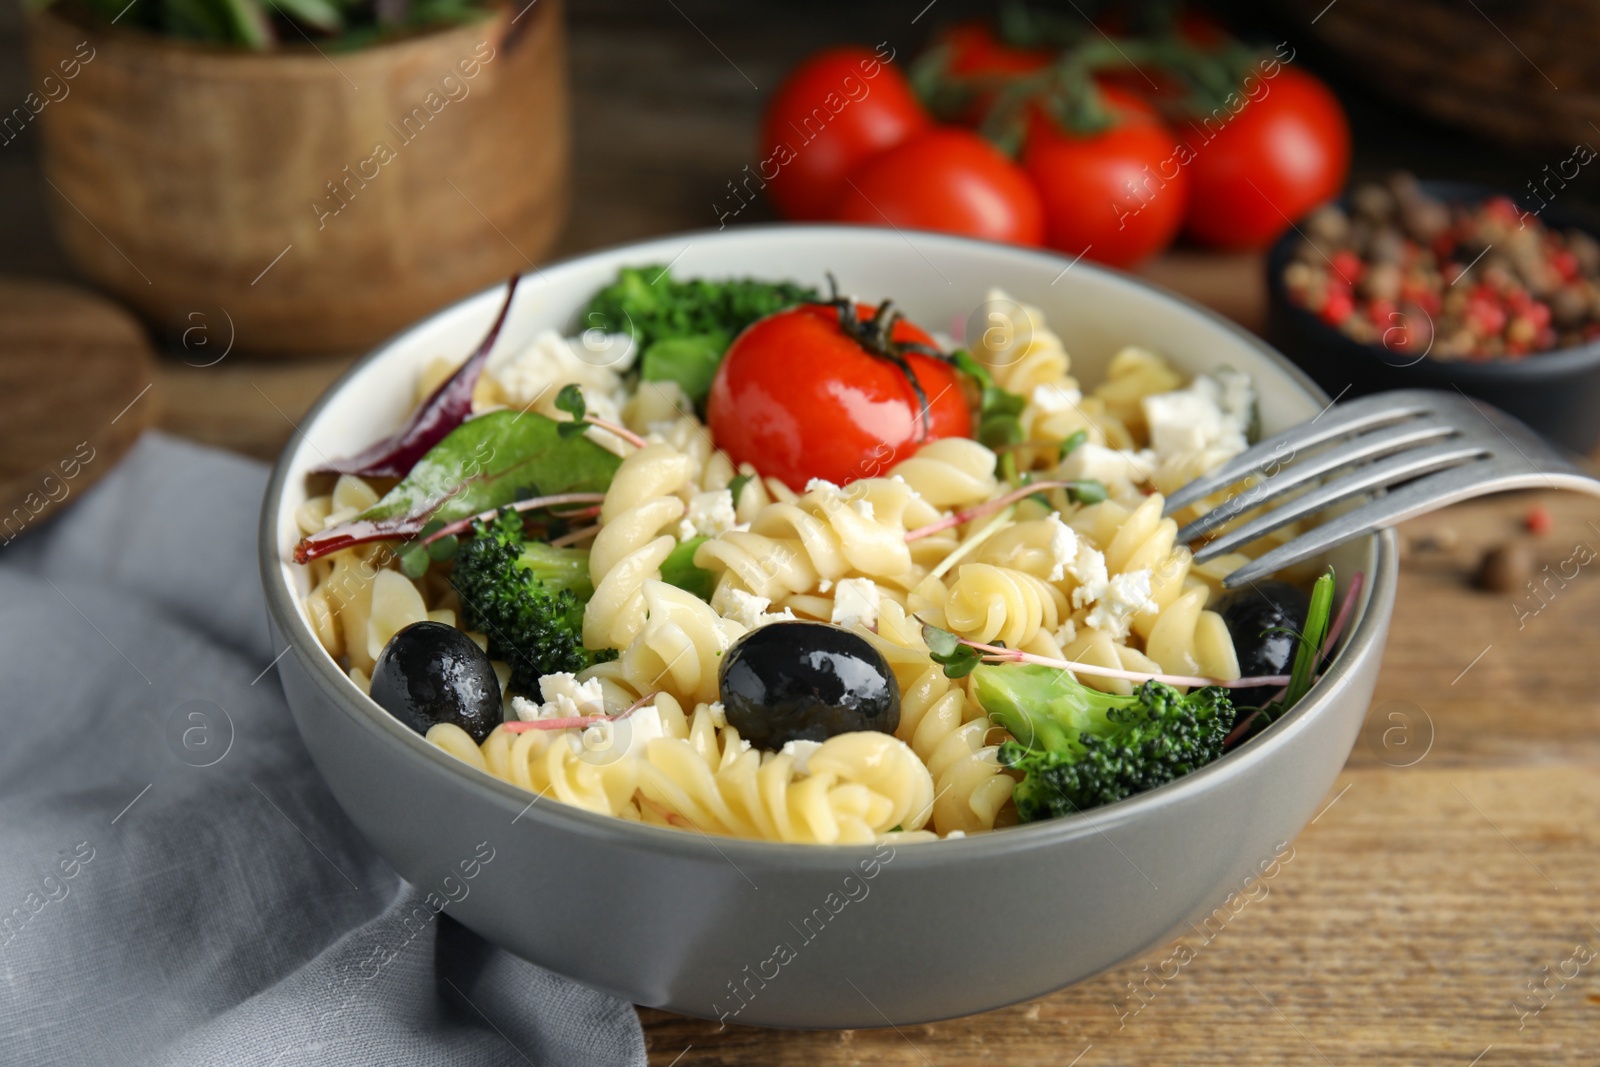 Photo of Bowl of delicious pasta with tomatoes, olives and broccoli on wooden table, closeup